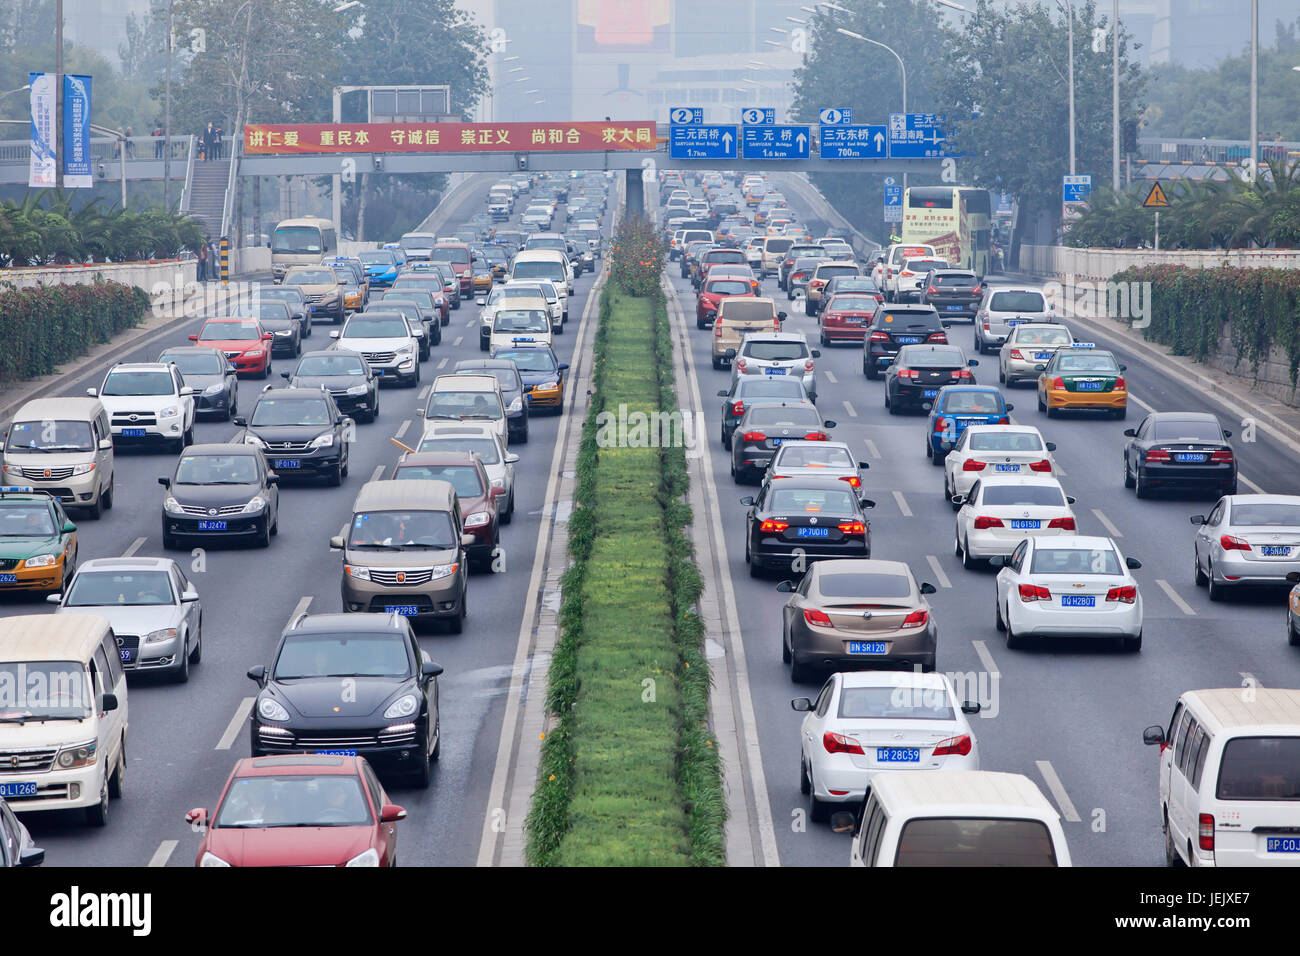 BEIJING-OCT. 19, 2014. Traffic jam in smog covered city. Beijing smog alert went to orange, means 'hazardous', maily caused by exhaust emission. Stock Photo